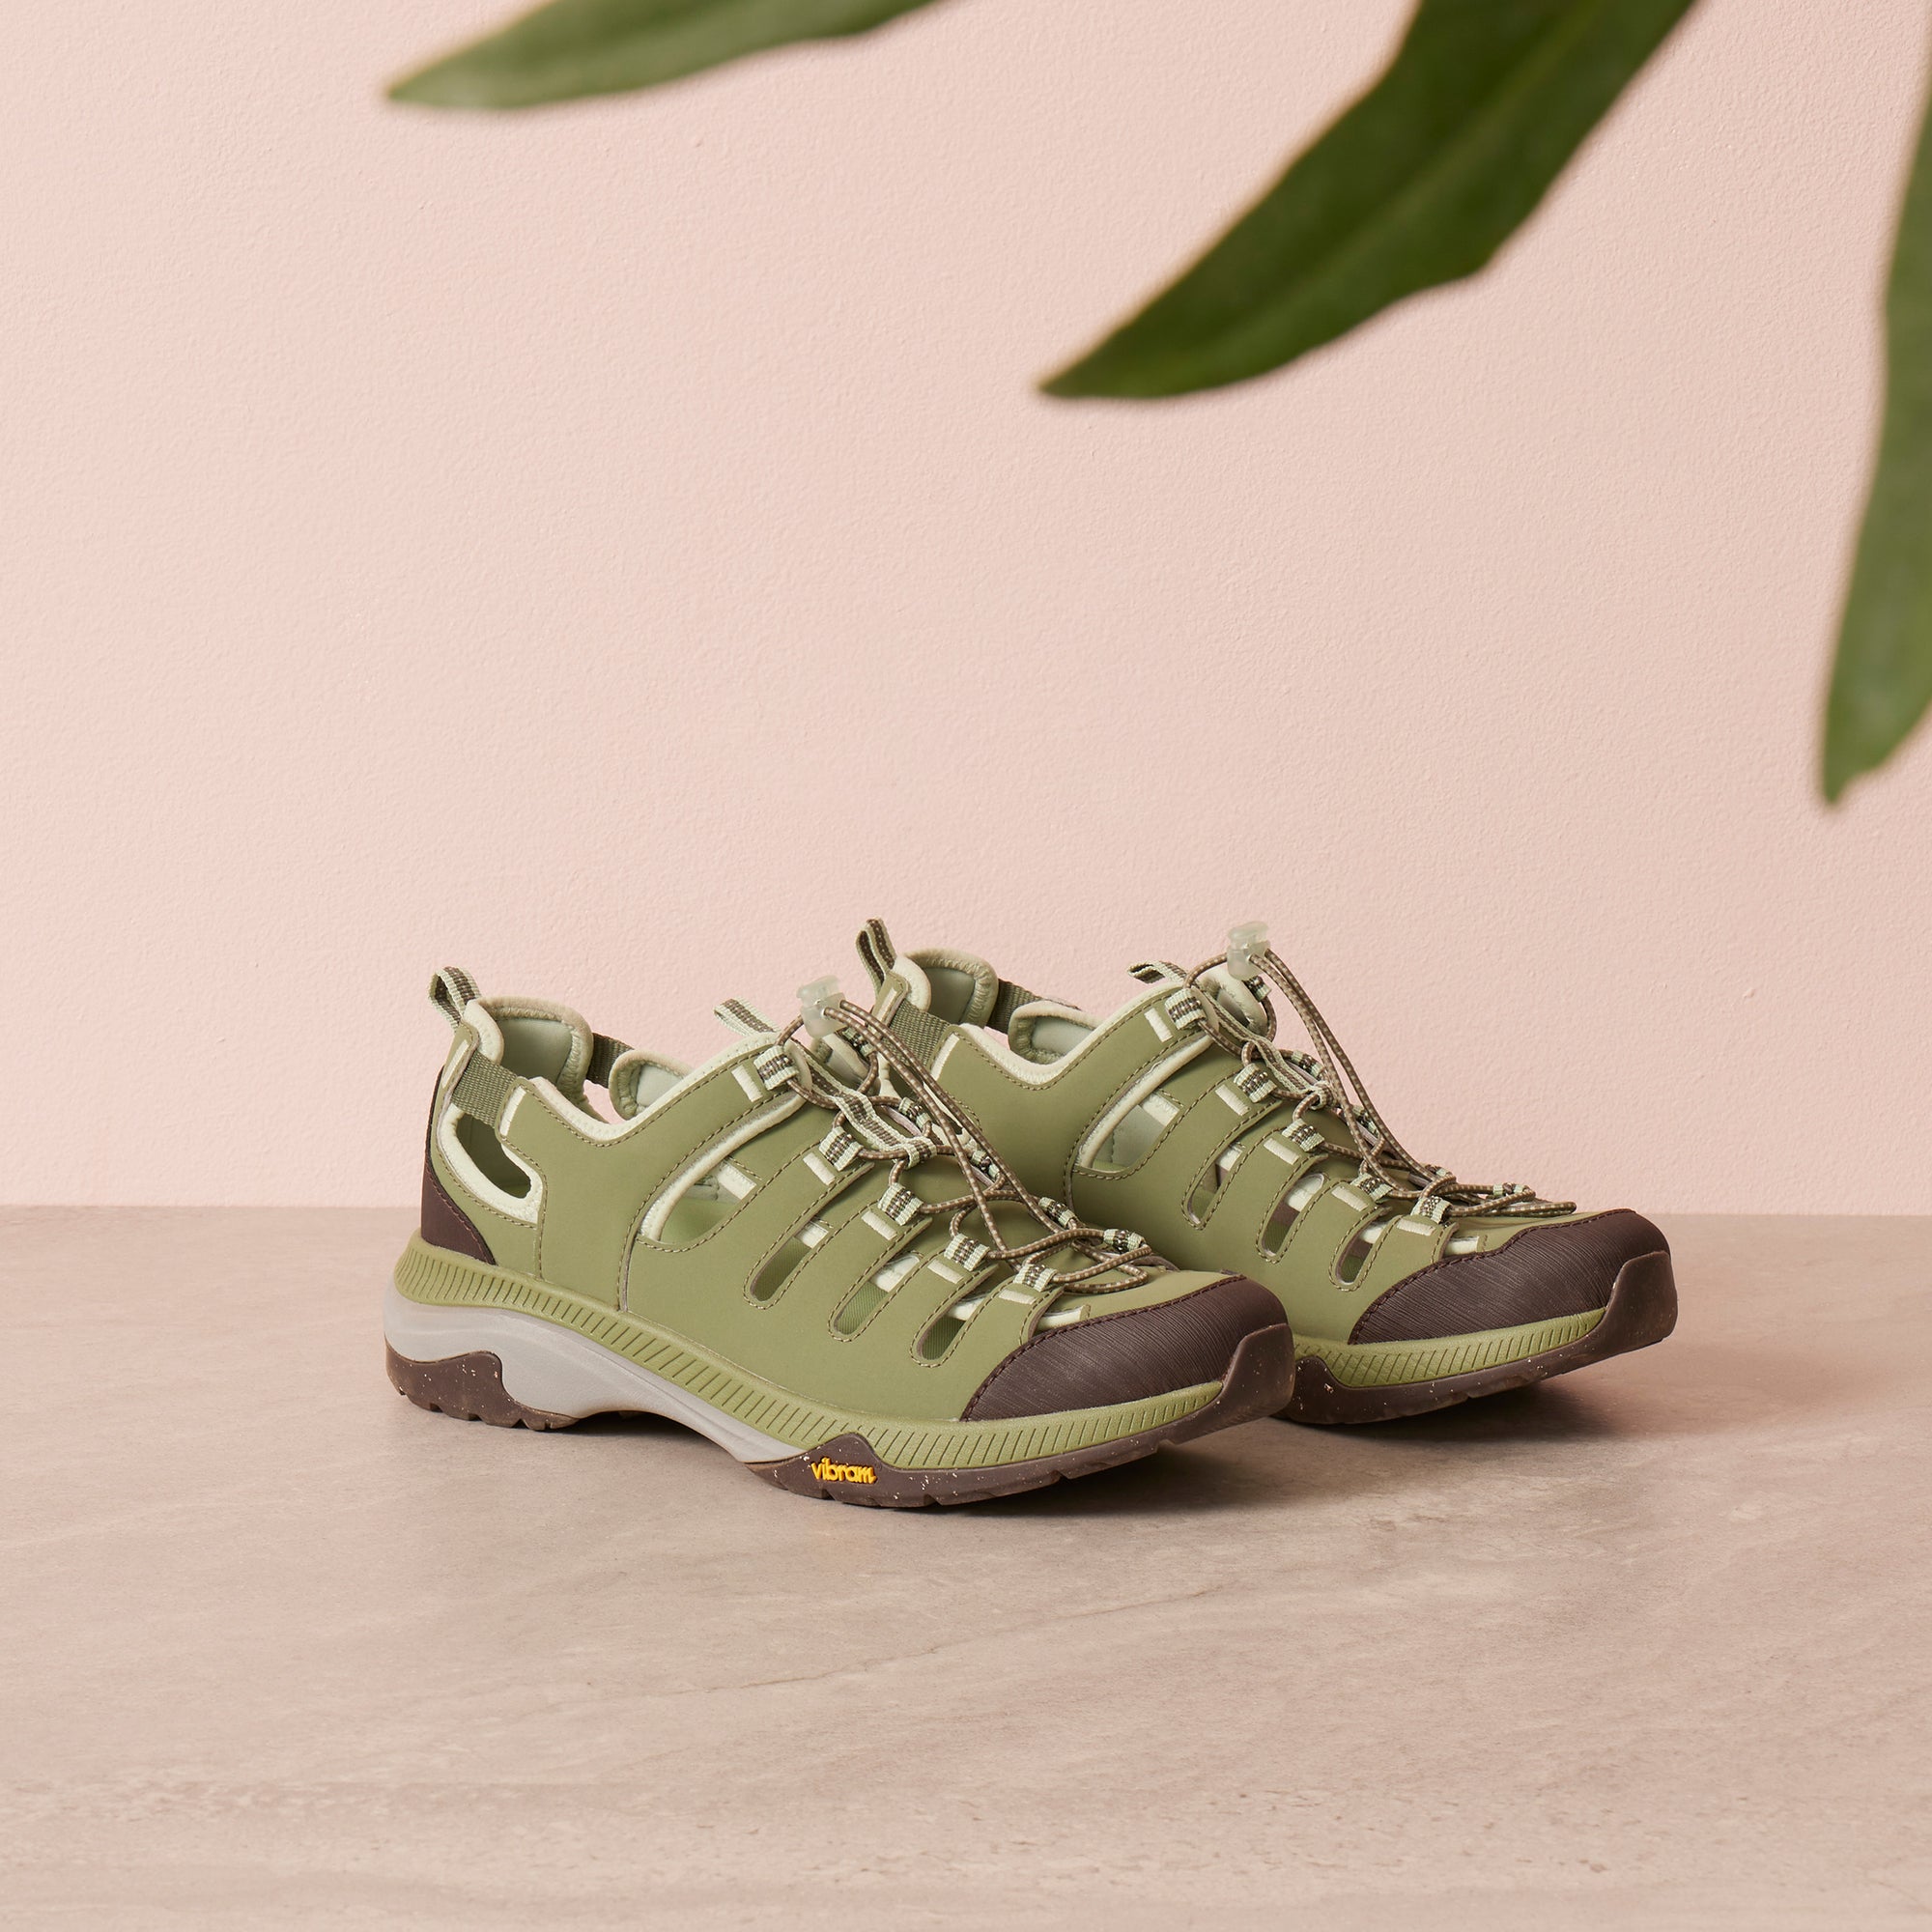 A green sandal sneaker with a durable Vibram rubber outsole.